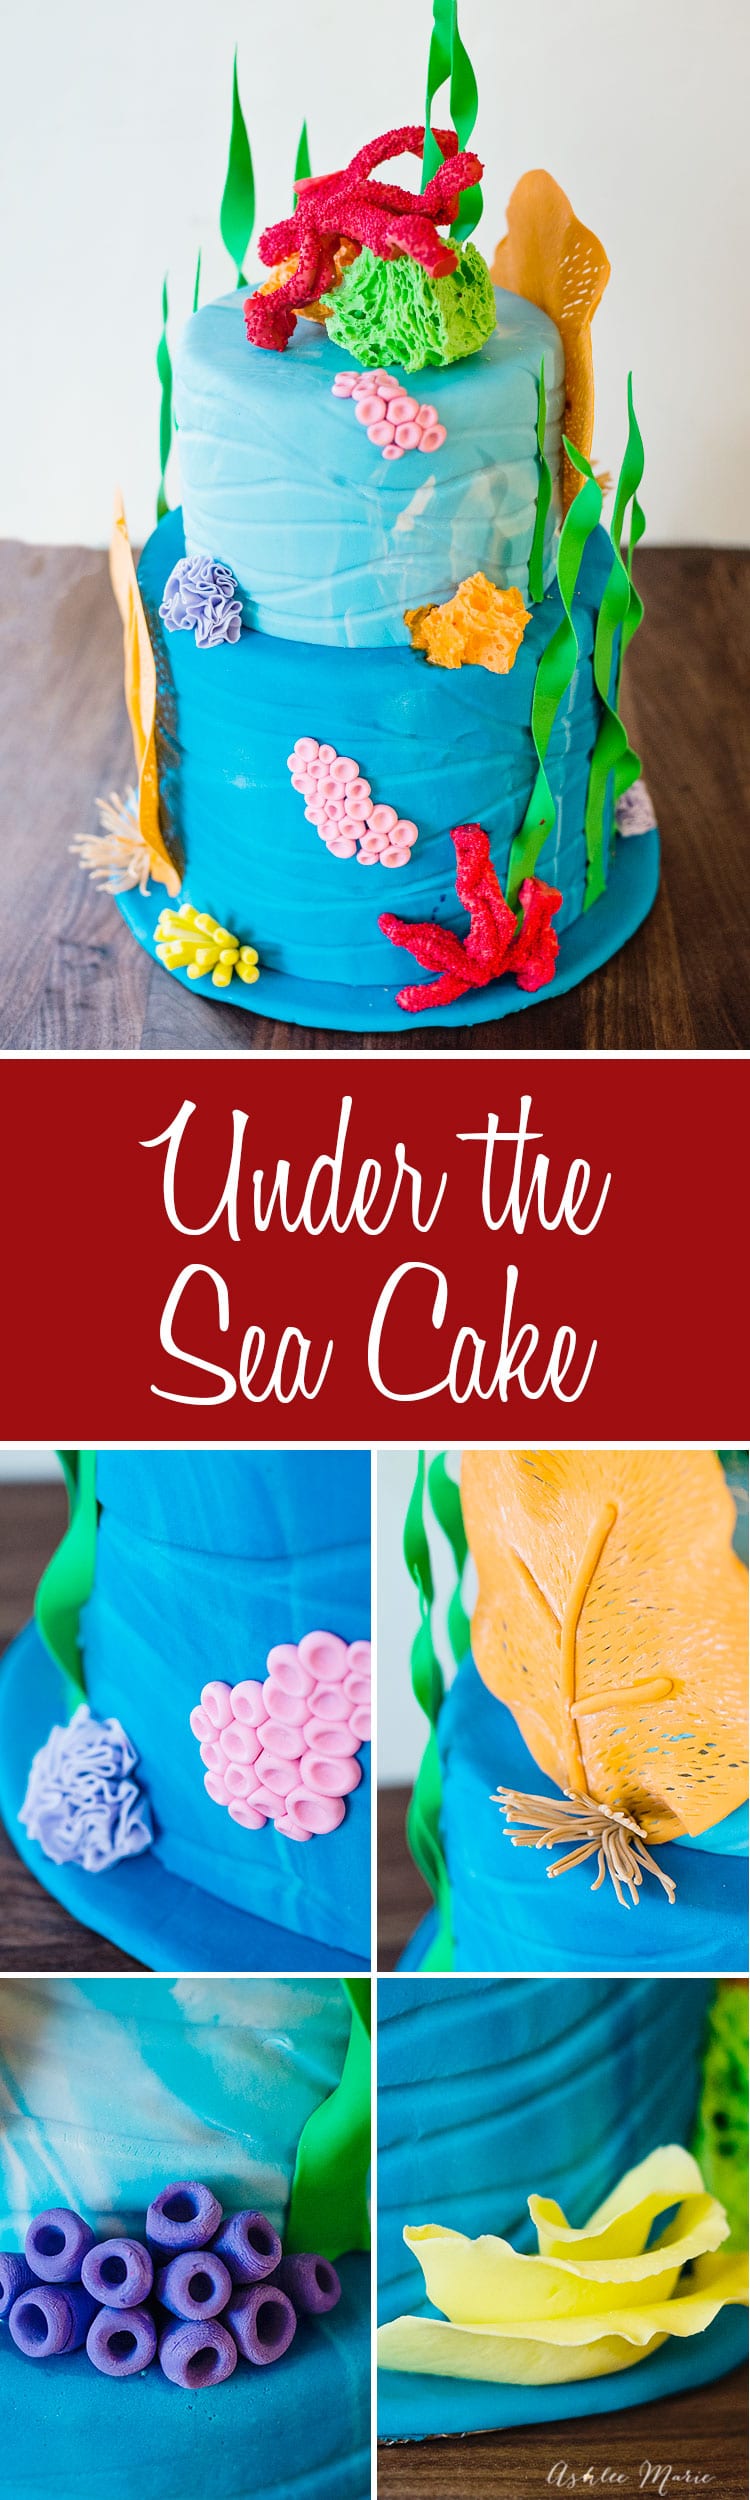 a video tutorial to make your own colorful coral for a sweet under the sea cake